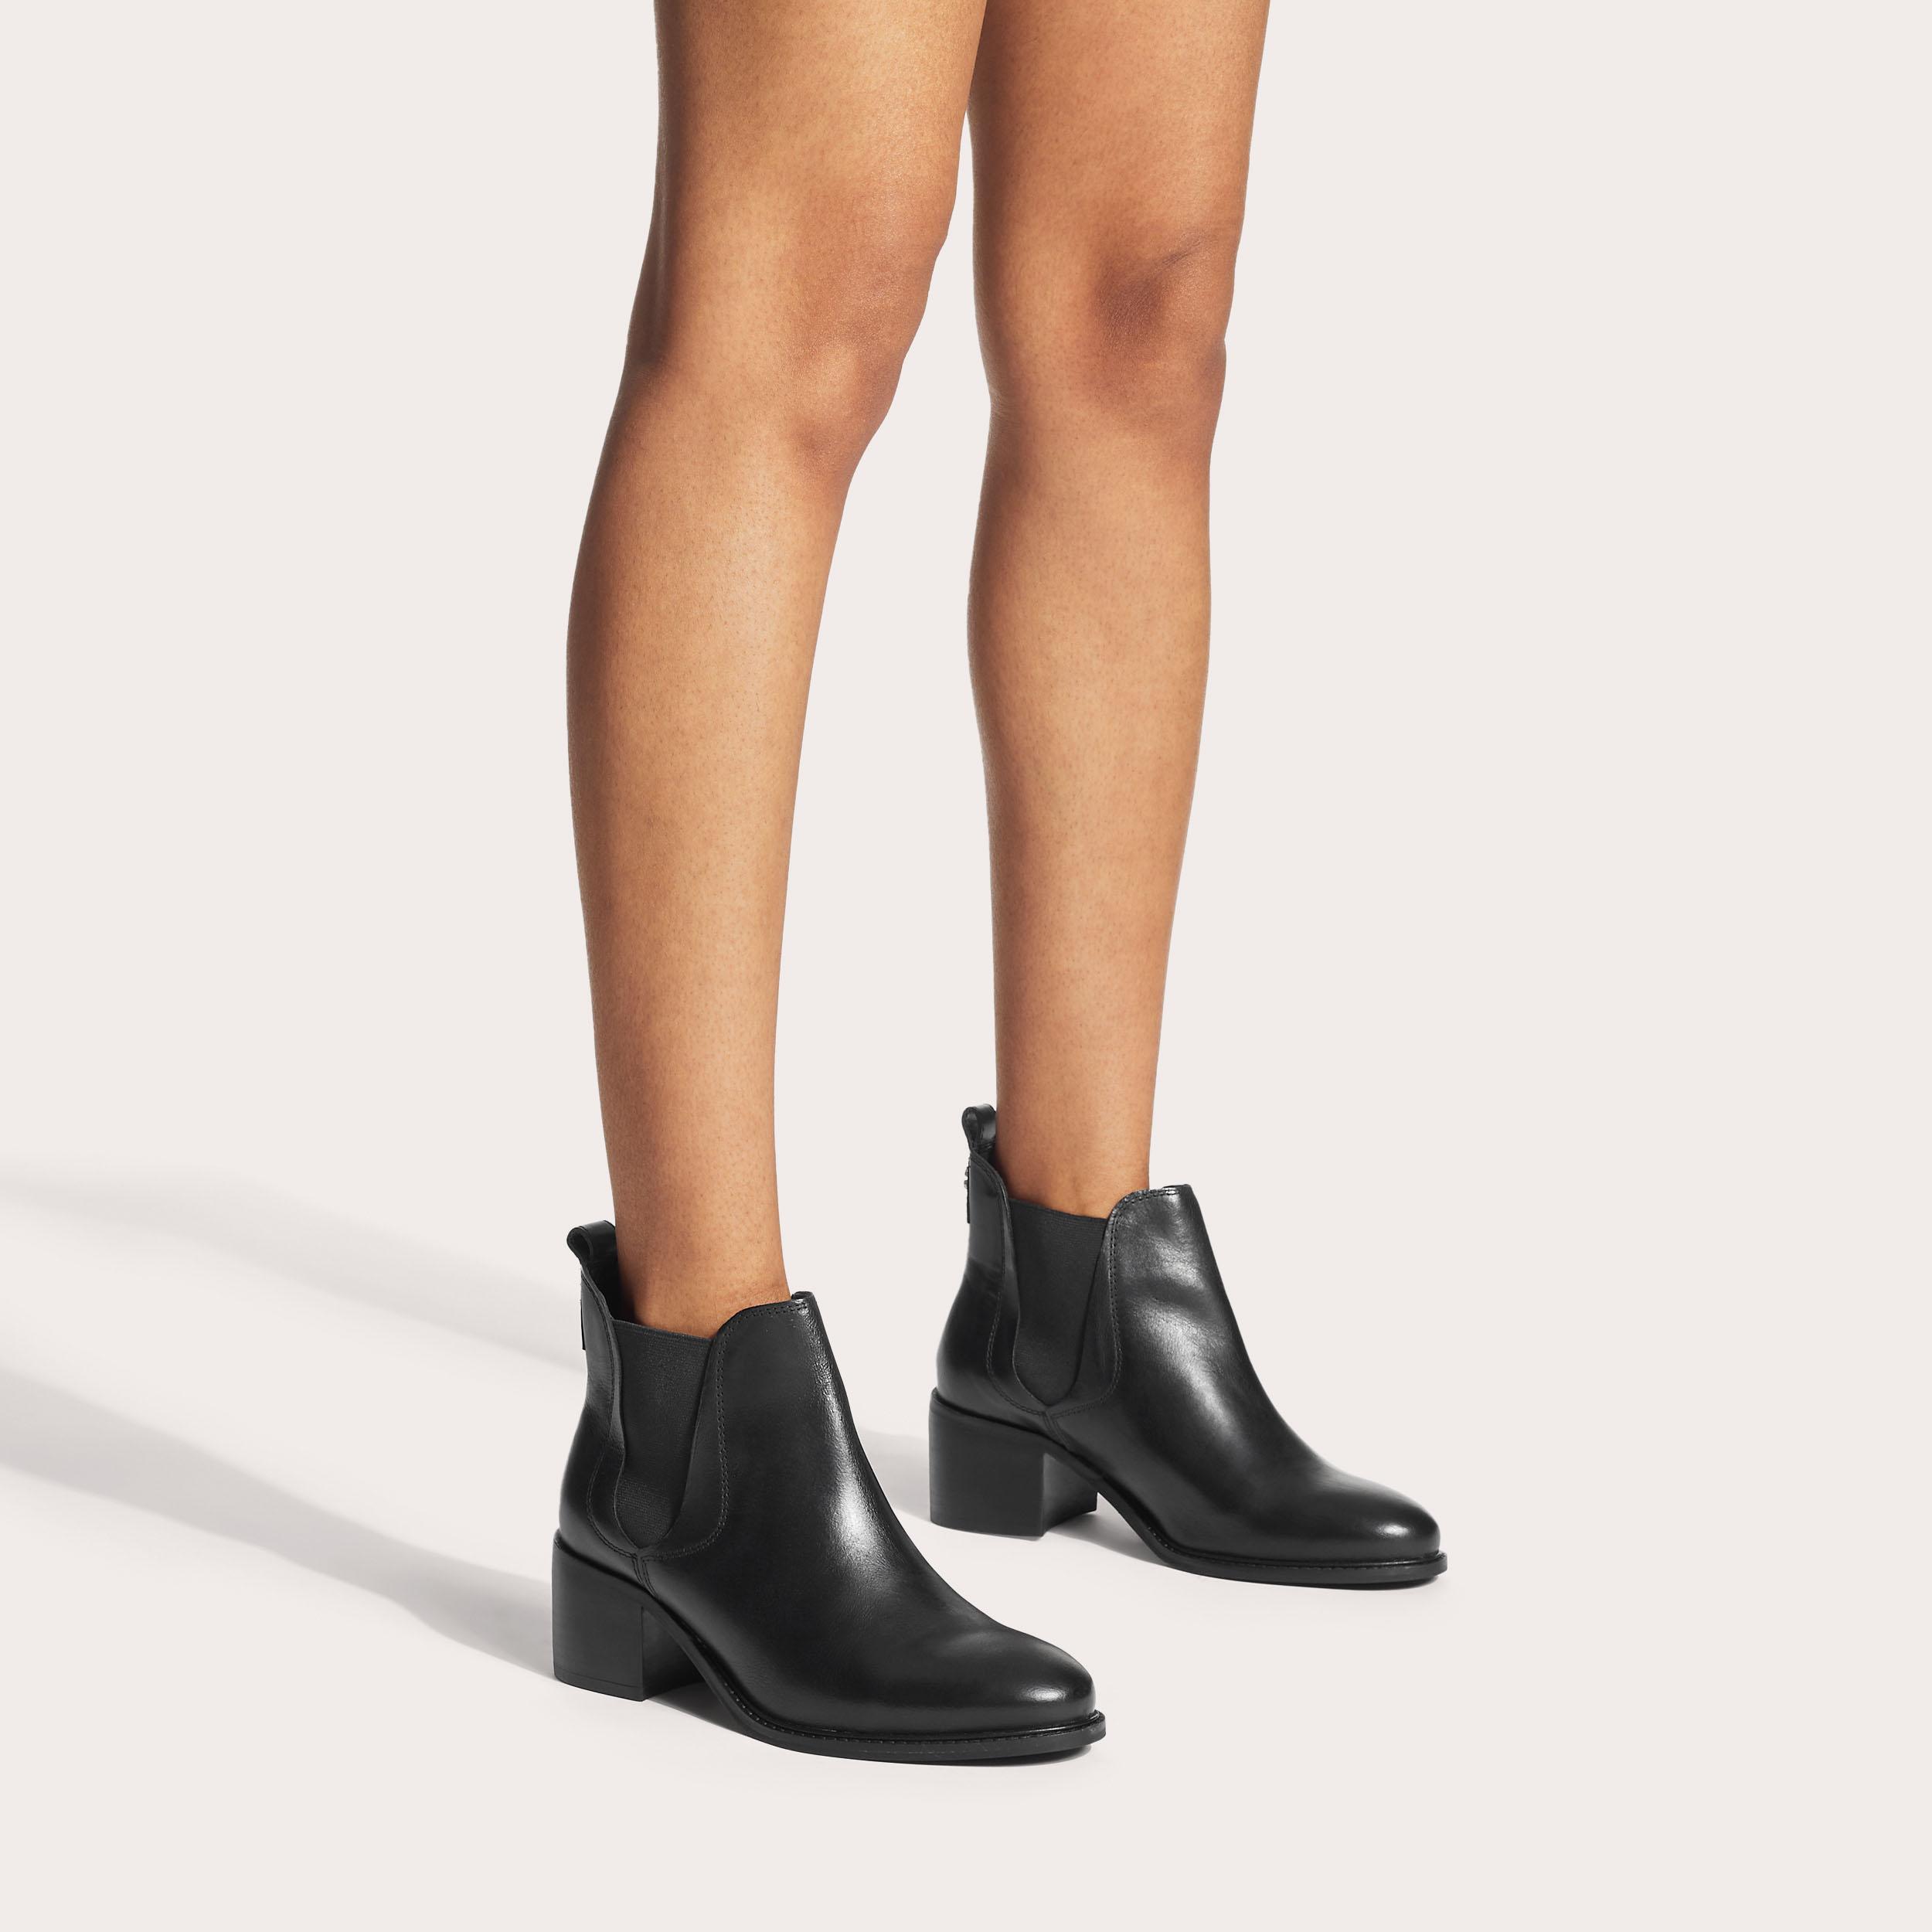 RONALD 2 Black Leather Ankle Boot by CARVELA COMFORT